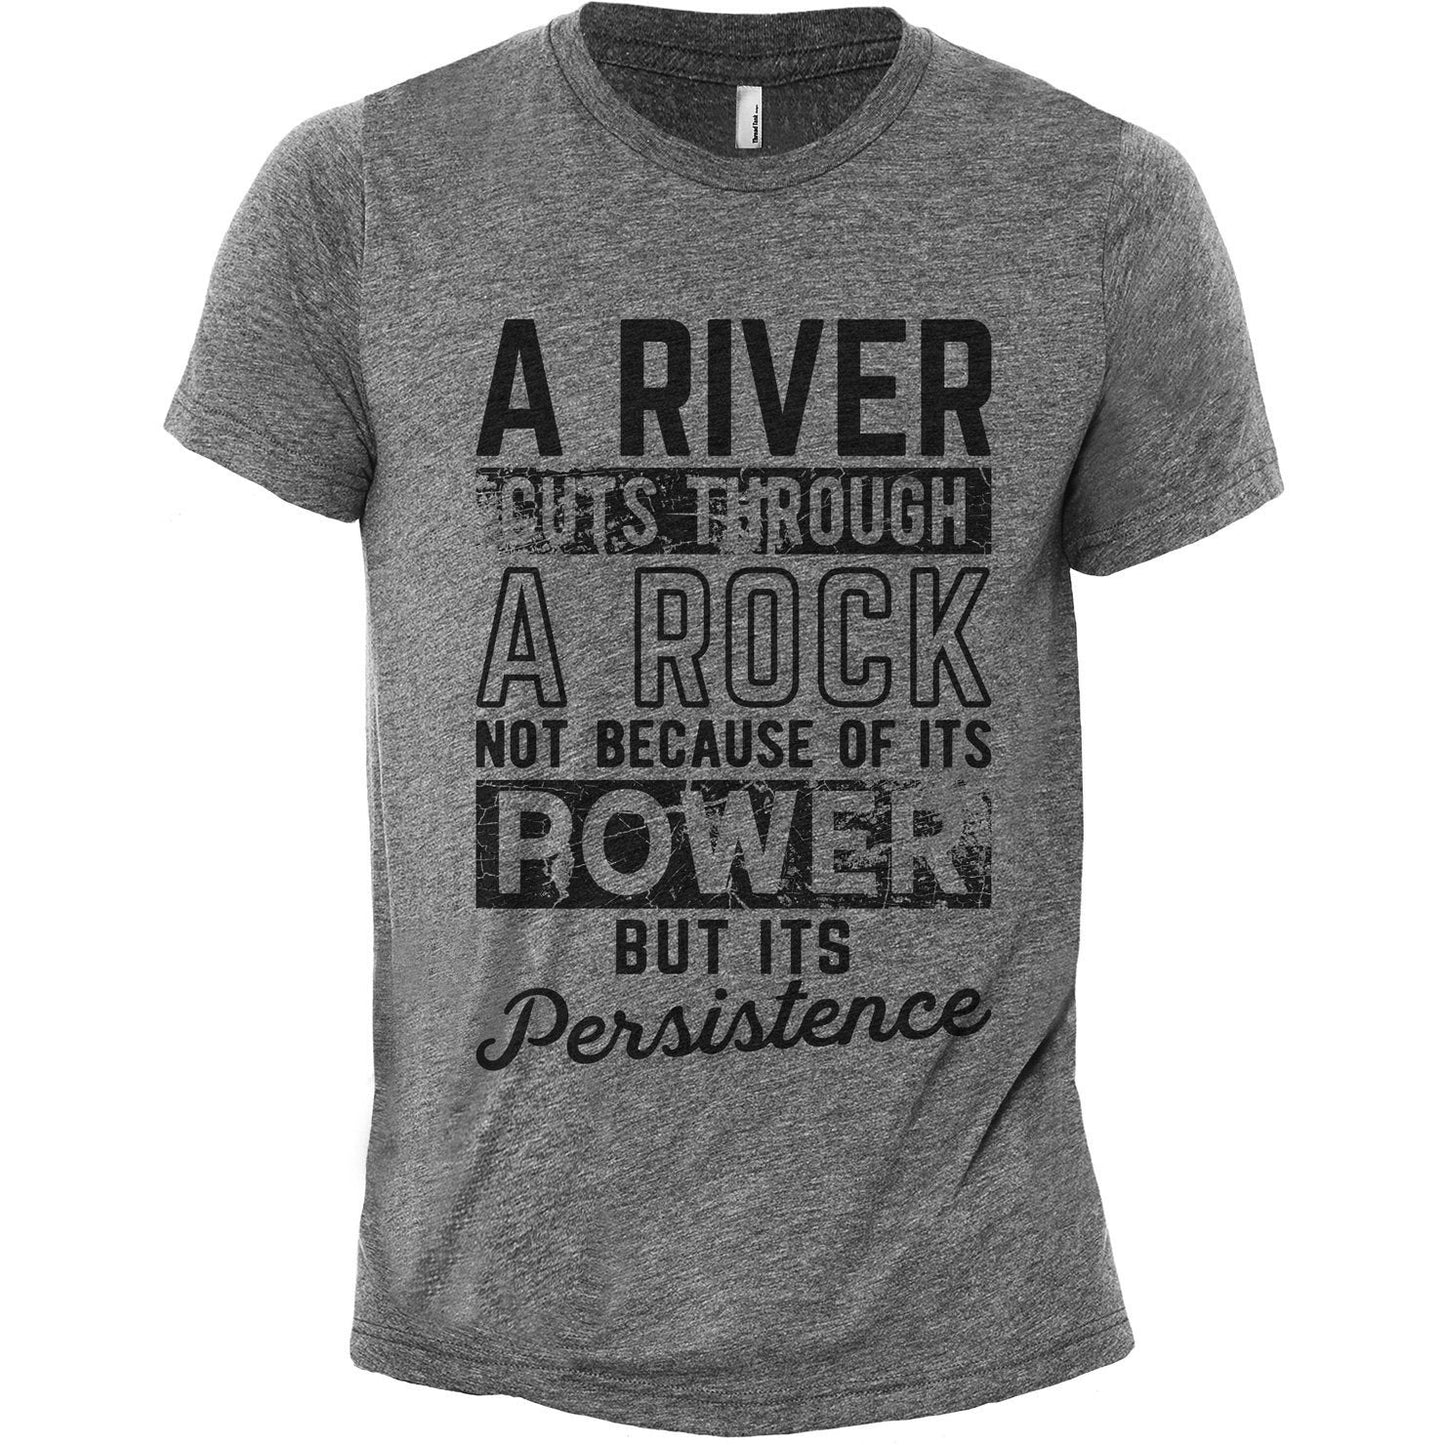 A River Cuts Through A Rock Not Because Of It's Power But It's Persistence Heather Grey Printed Graphic Men's Crew T-Shirt Tee